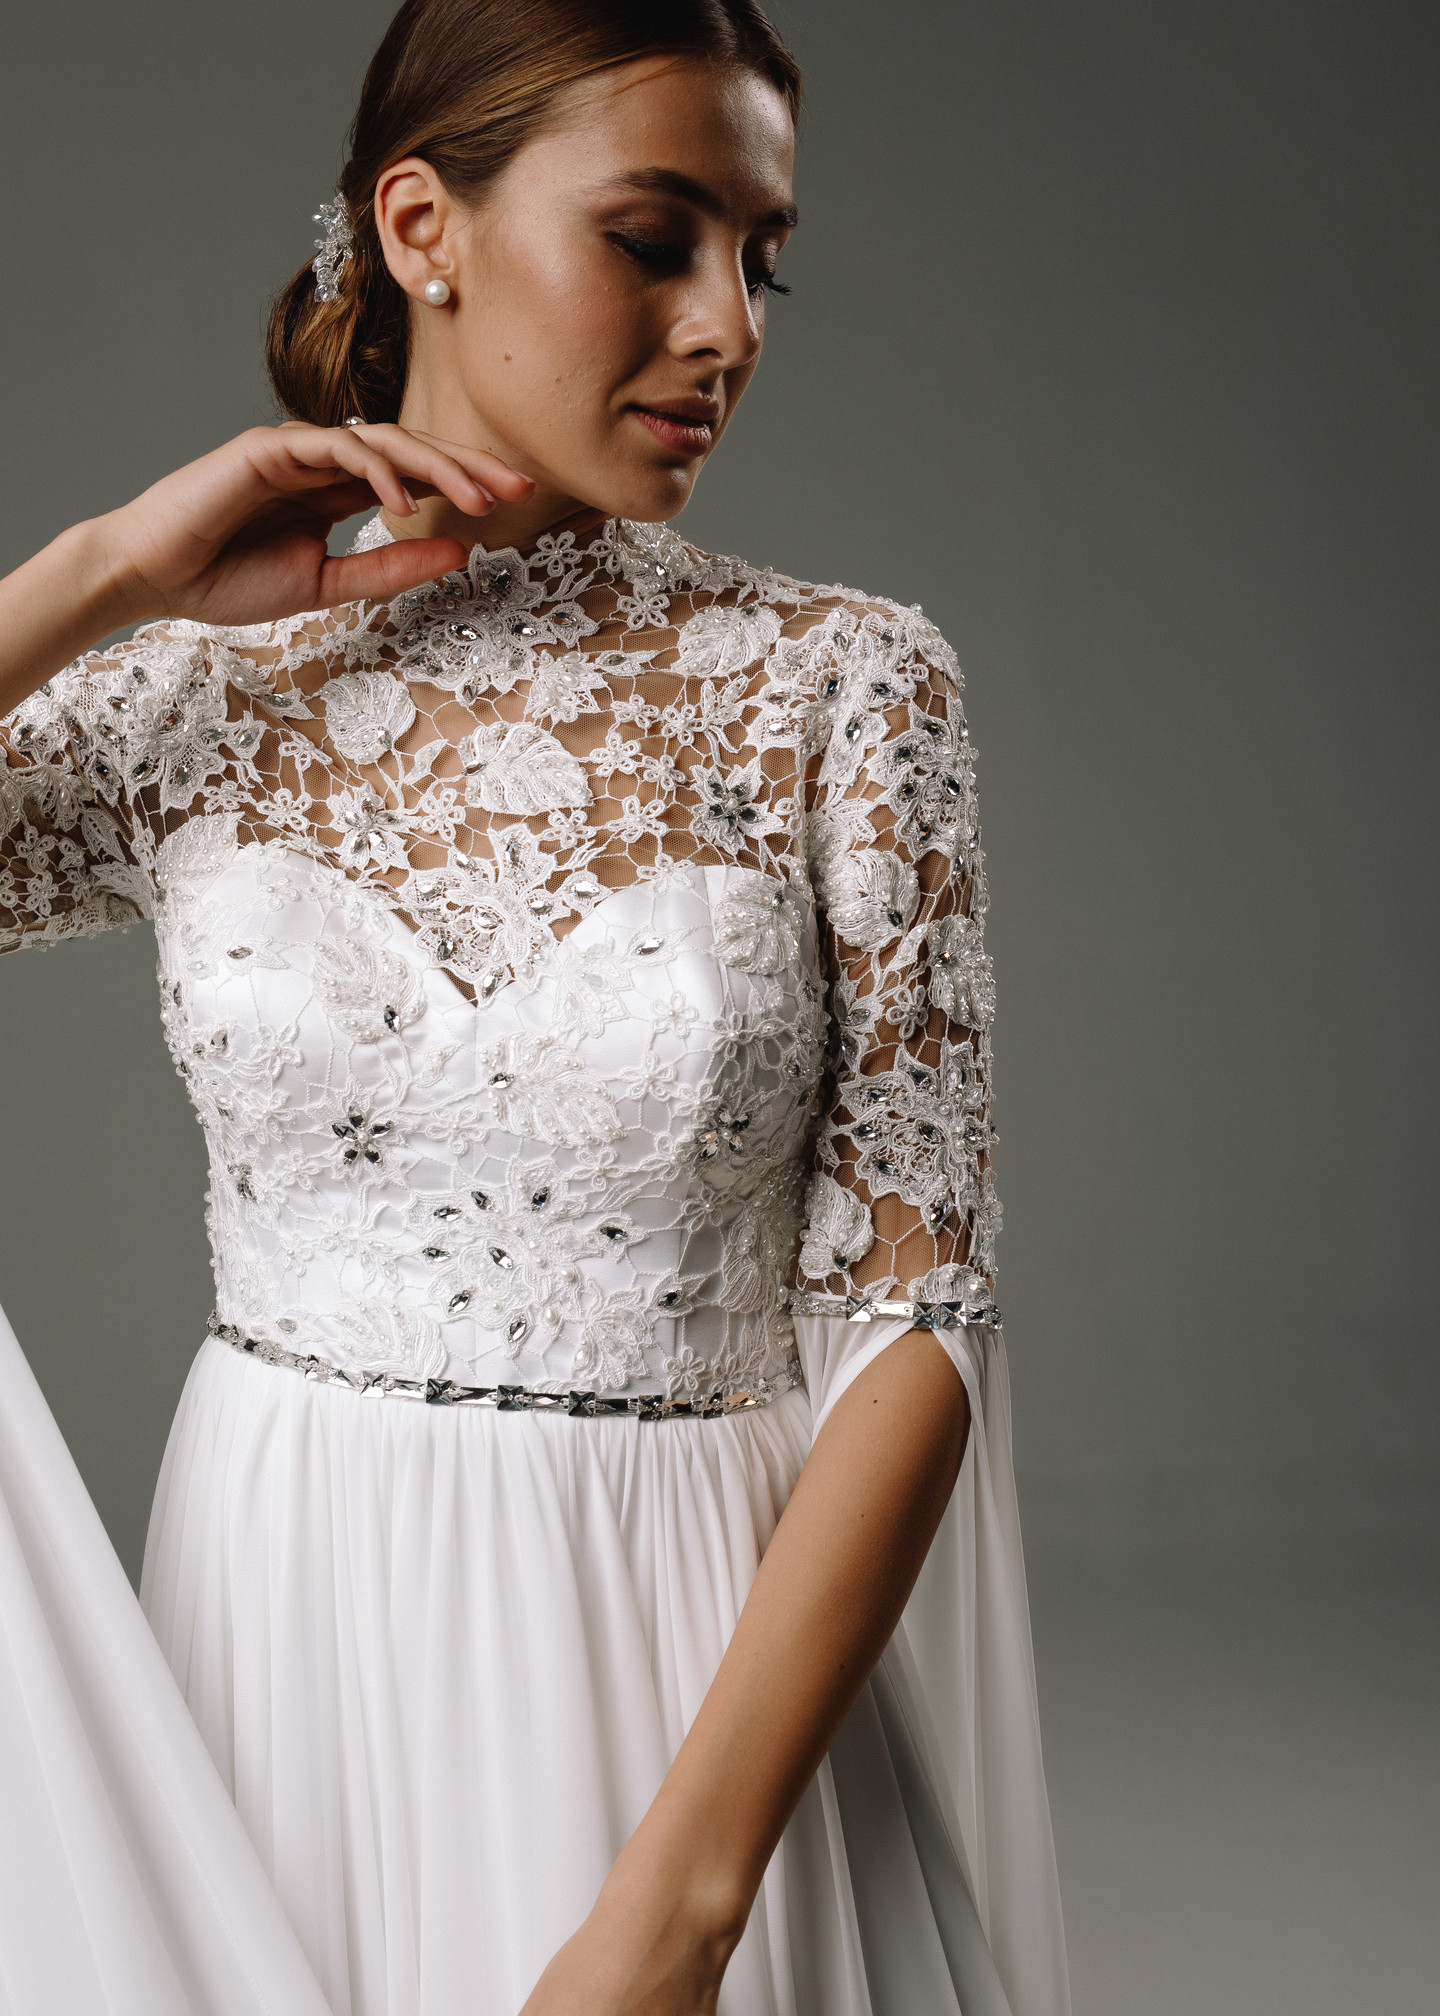 Augustine gown, 2020, couture, dress, bridal, off-white, lace, embroidery, sleeves, A-line, archive